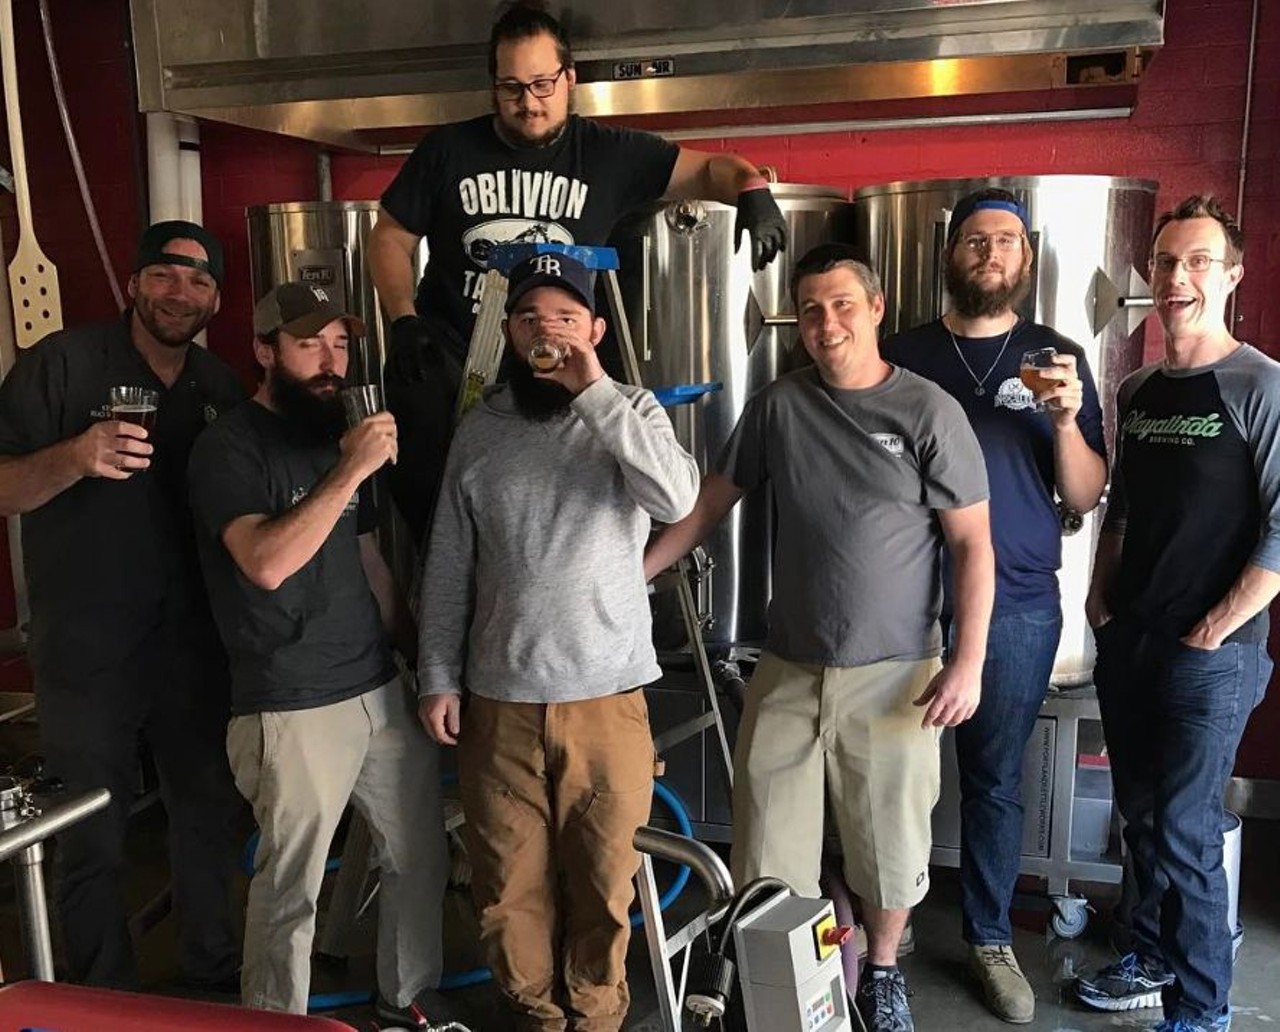 Saturday, Oct. 7 
Ten10 Fest
Music festival with 10 bands each contributing to limited-edition beers.
1 - 10 pm; Ten10 Brewing Company, 1010 Virginia Drive.; $10; (407)930-8993 ten10brewingcompany.com
Photo via ten10_brewing/Instagram